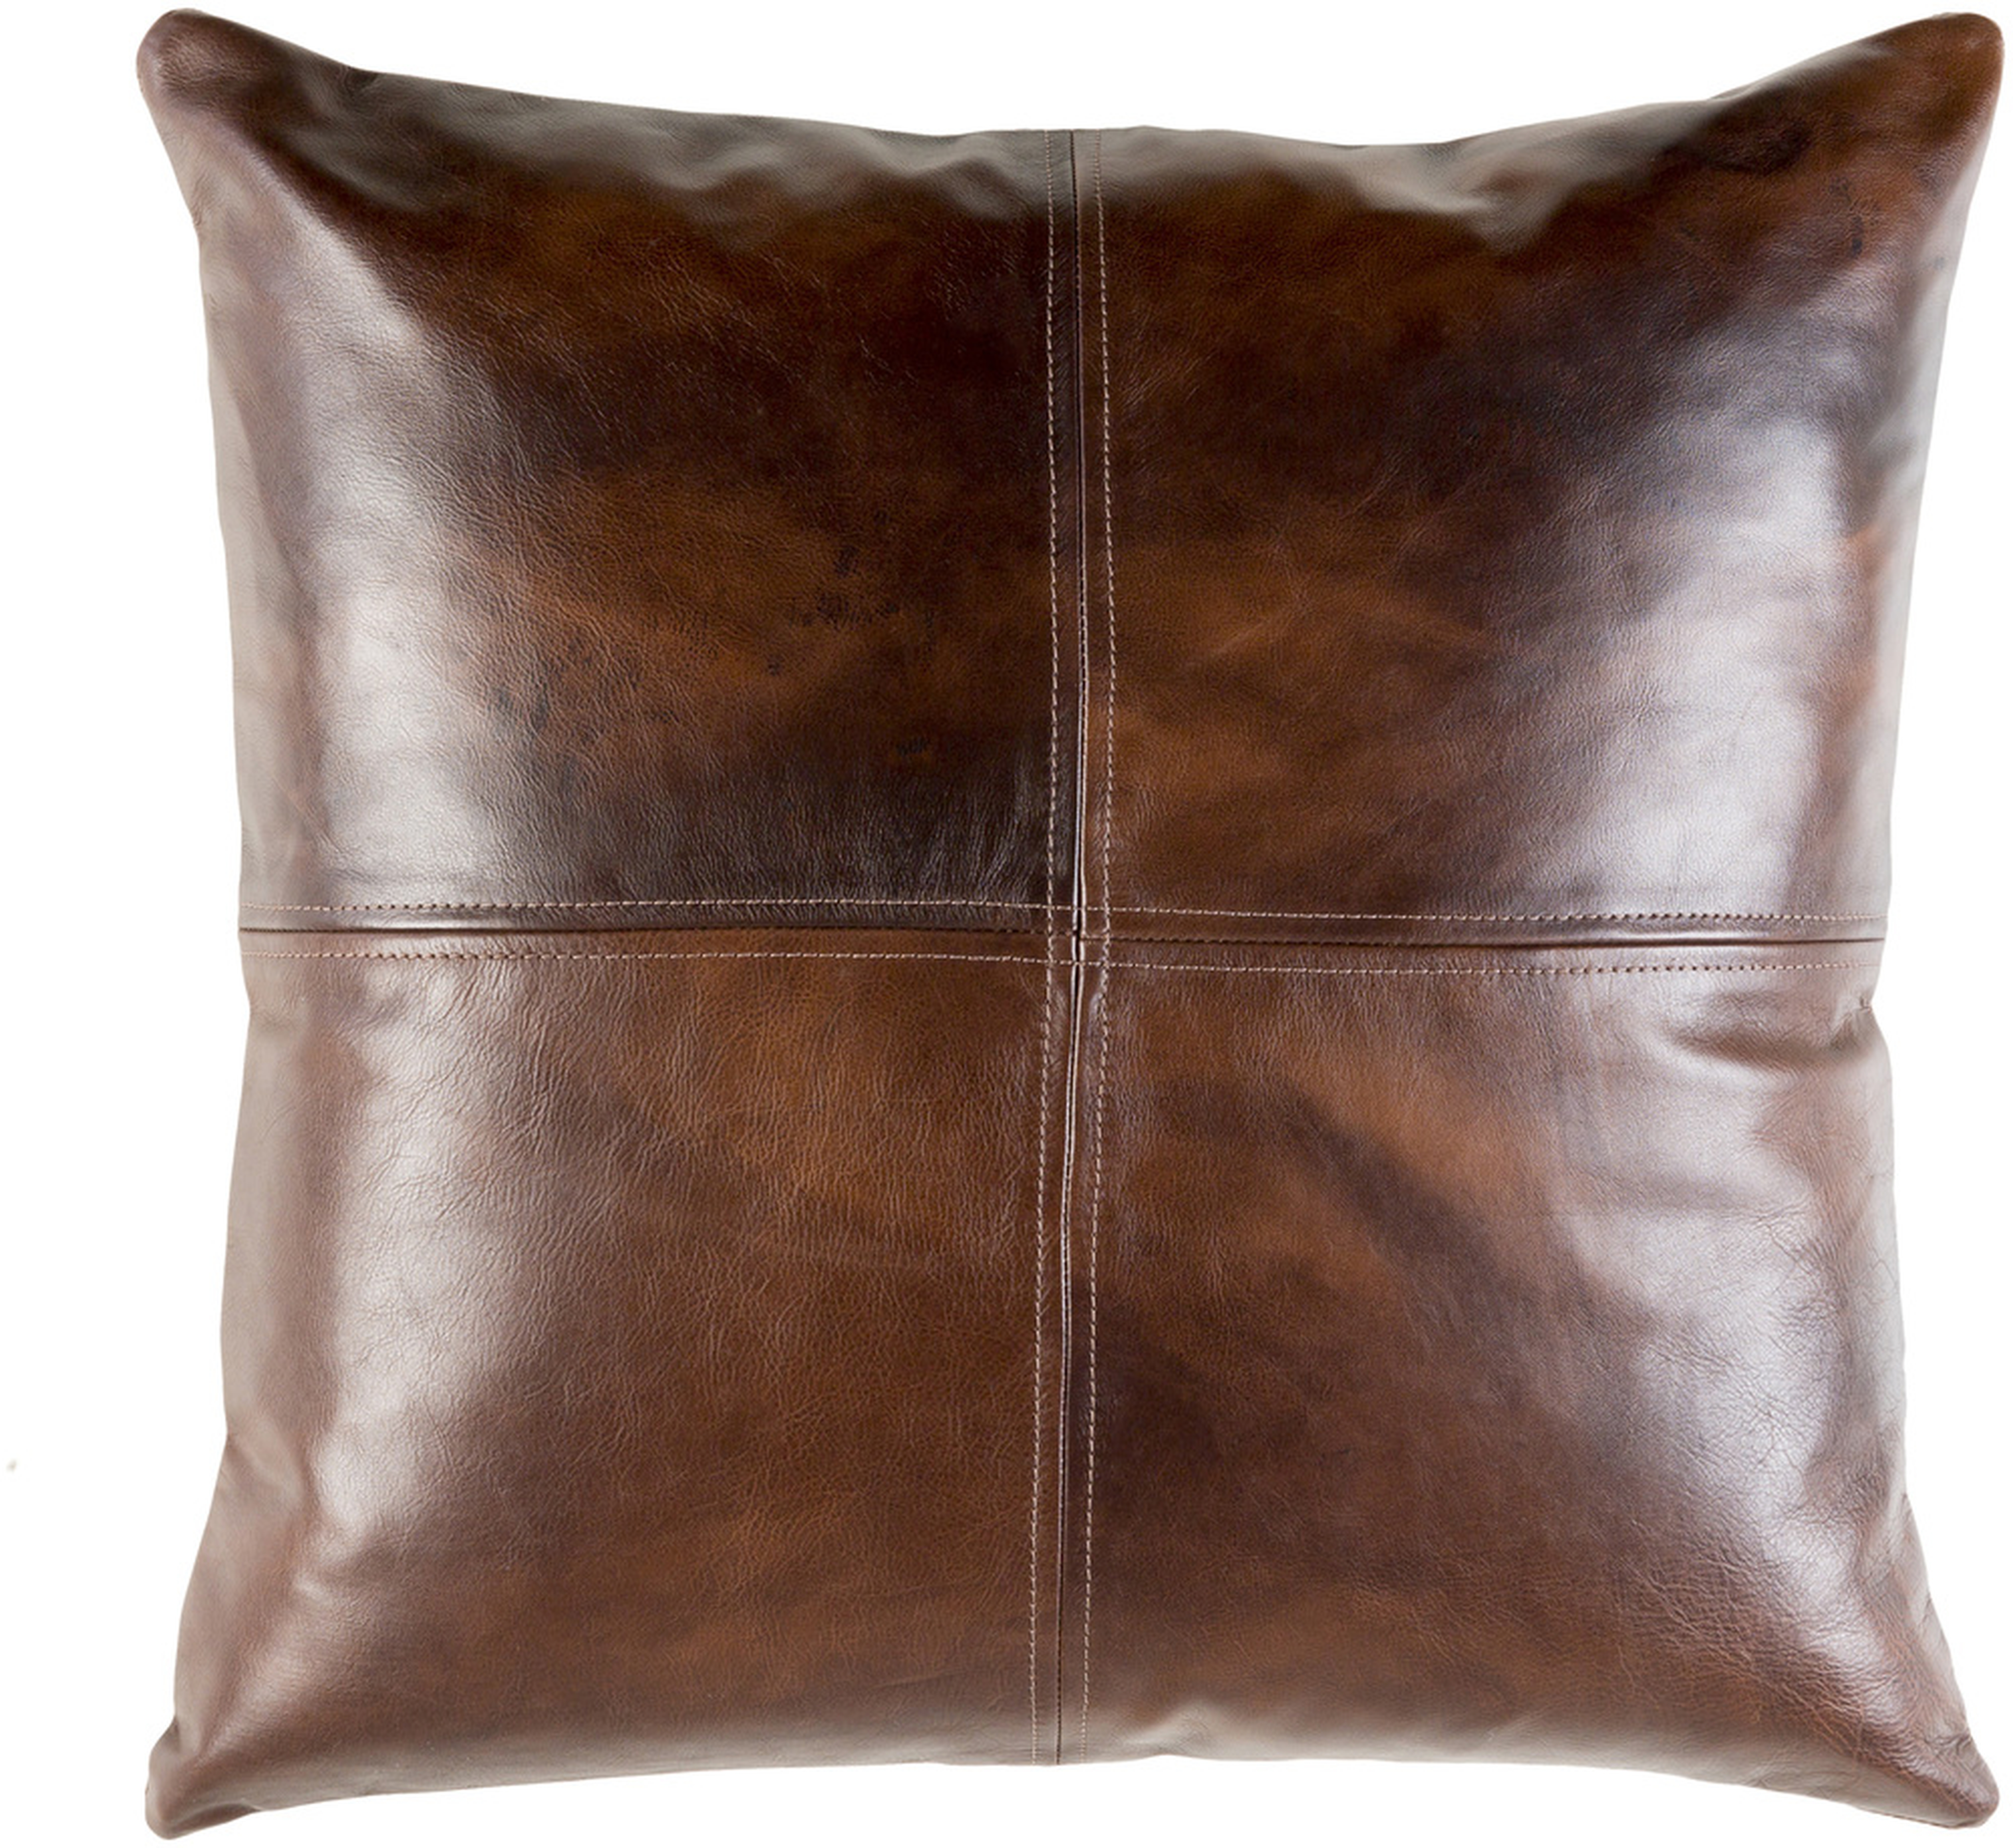 Leather Pillow - Sheffield SFD-001 - 20 x 20 with down insert - Surya